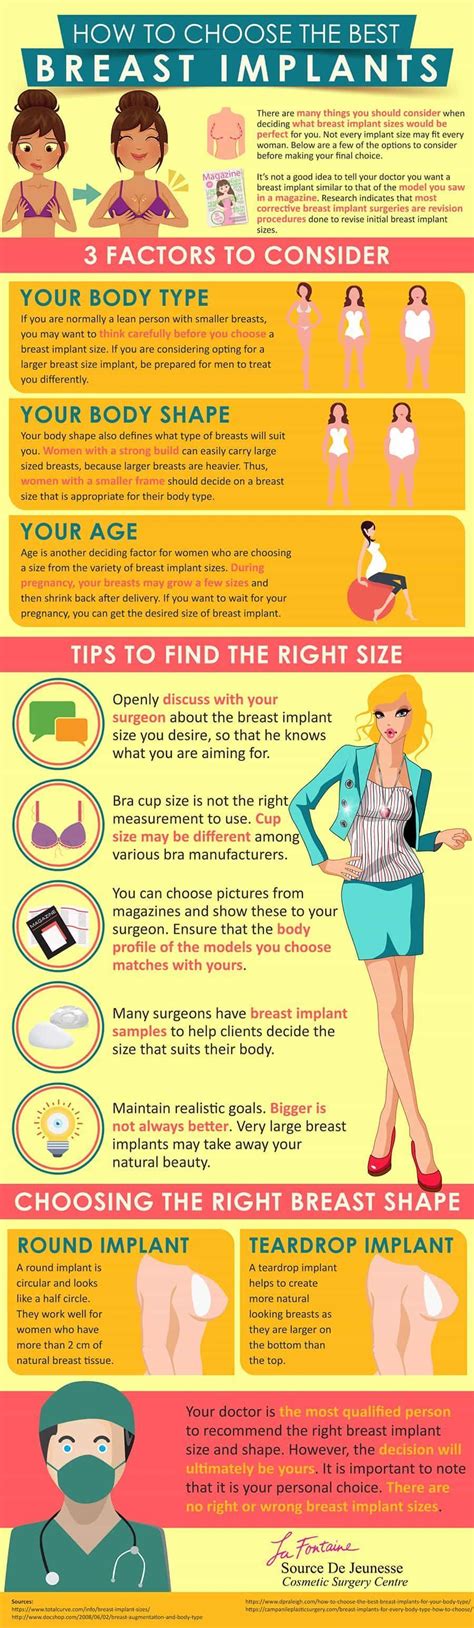 A Guide To Choosing The Best Breast Implants Infographic Breastcancerinfographic Infographic